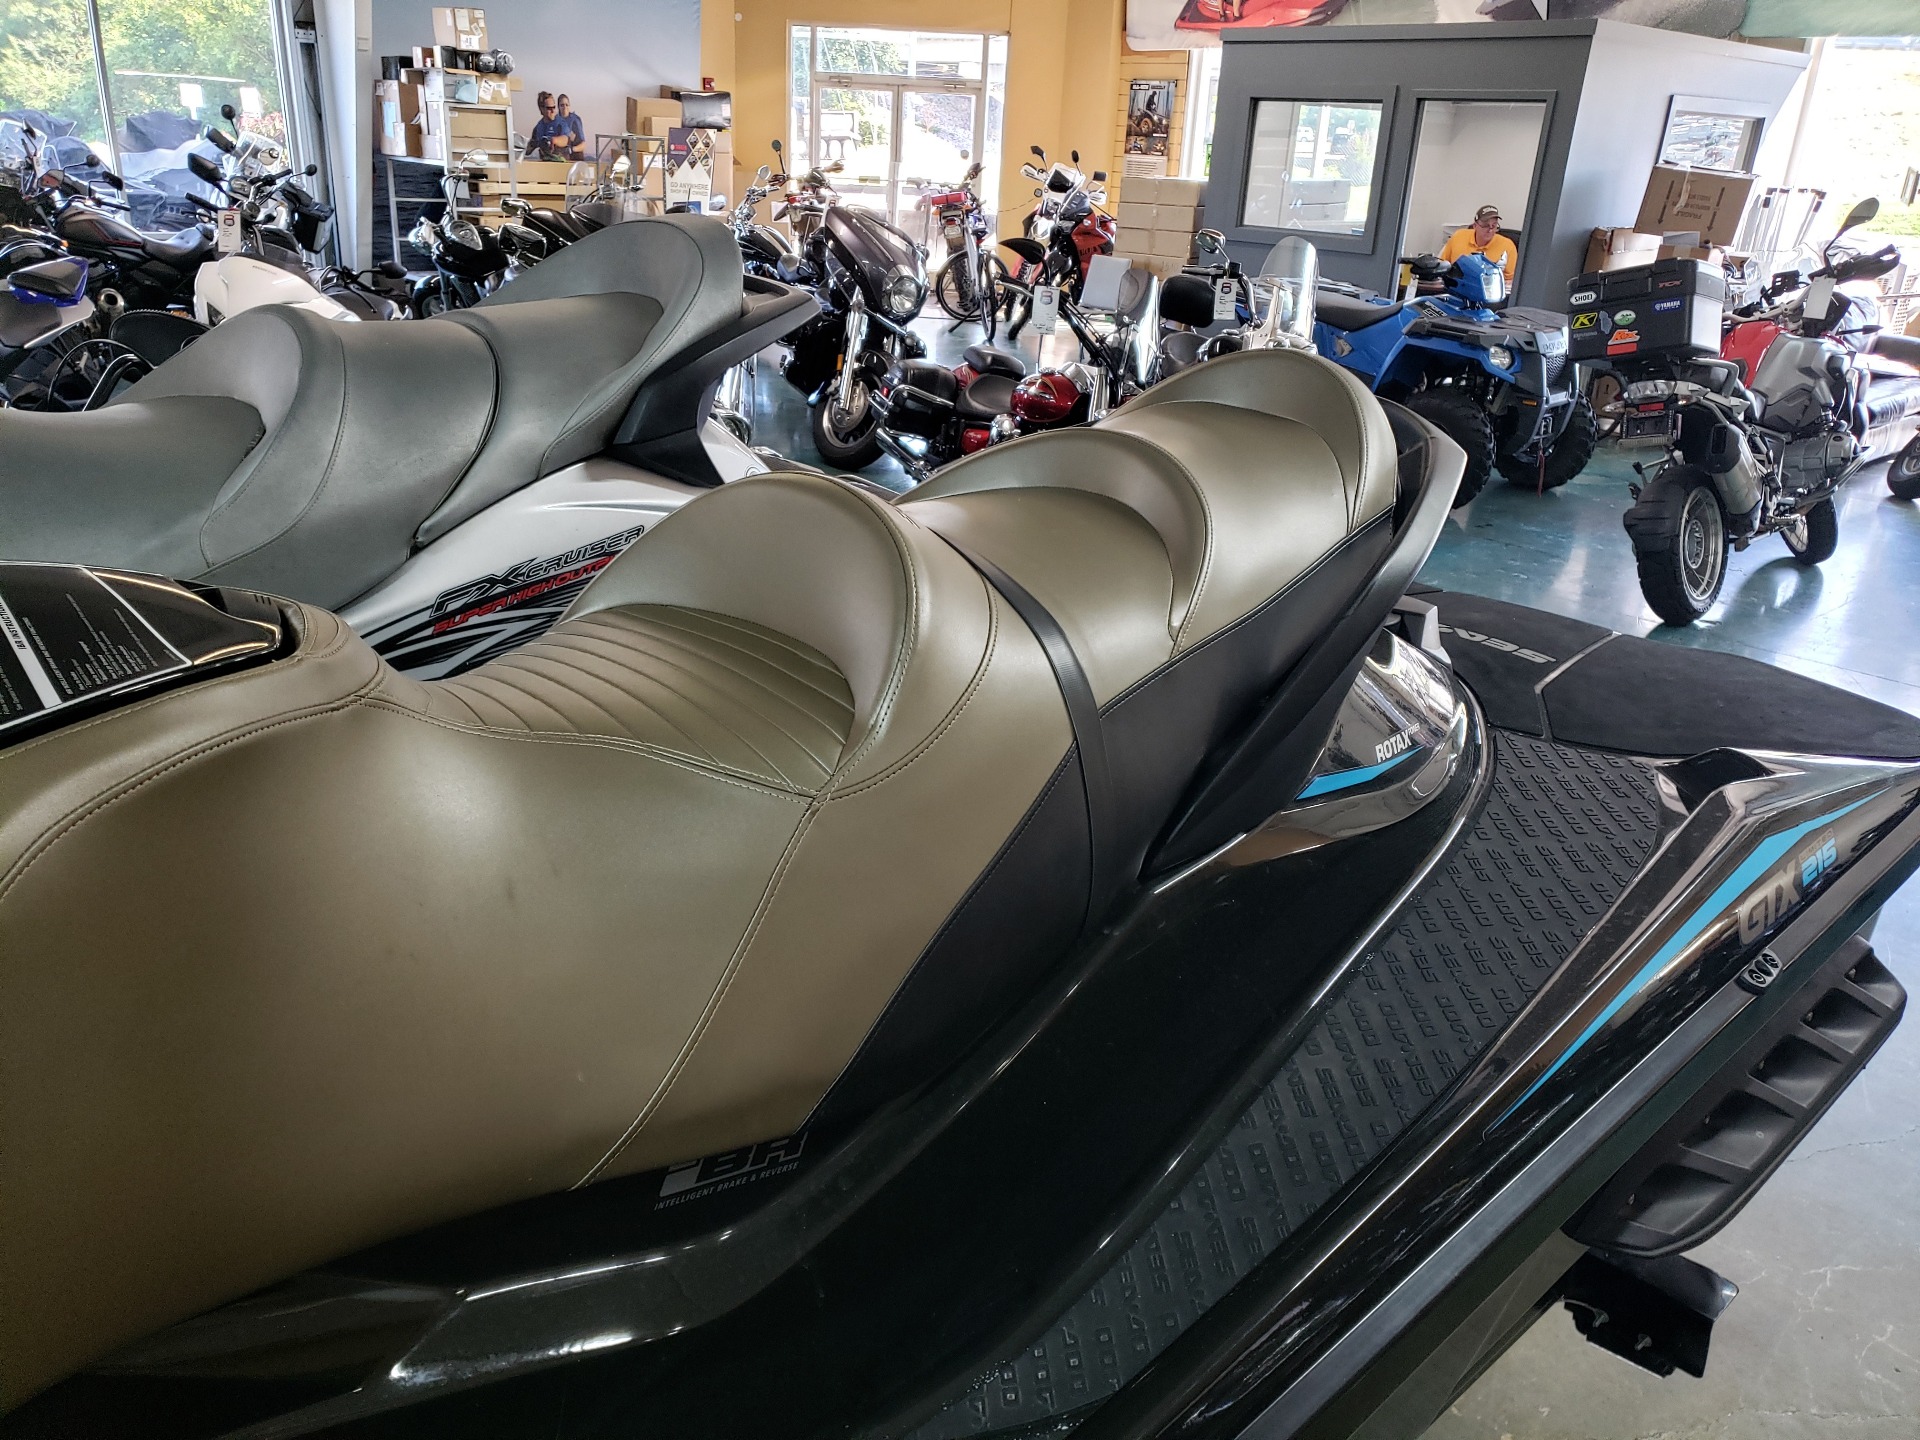 2016 Sea-Doo GTX Limited 215 in Louisville, Tennessee - Photo 6